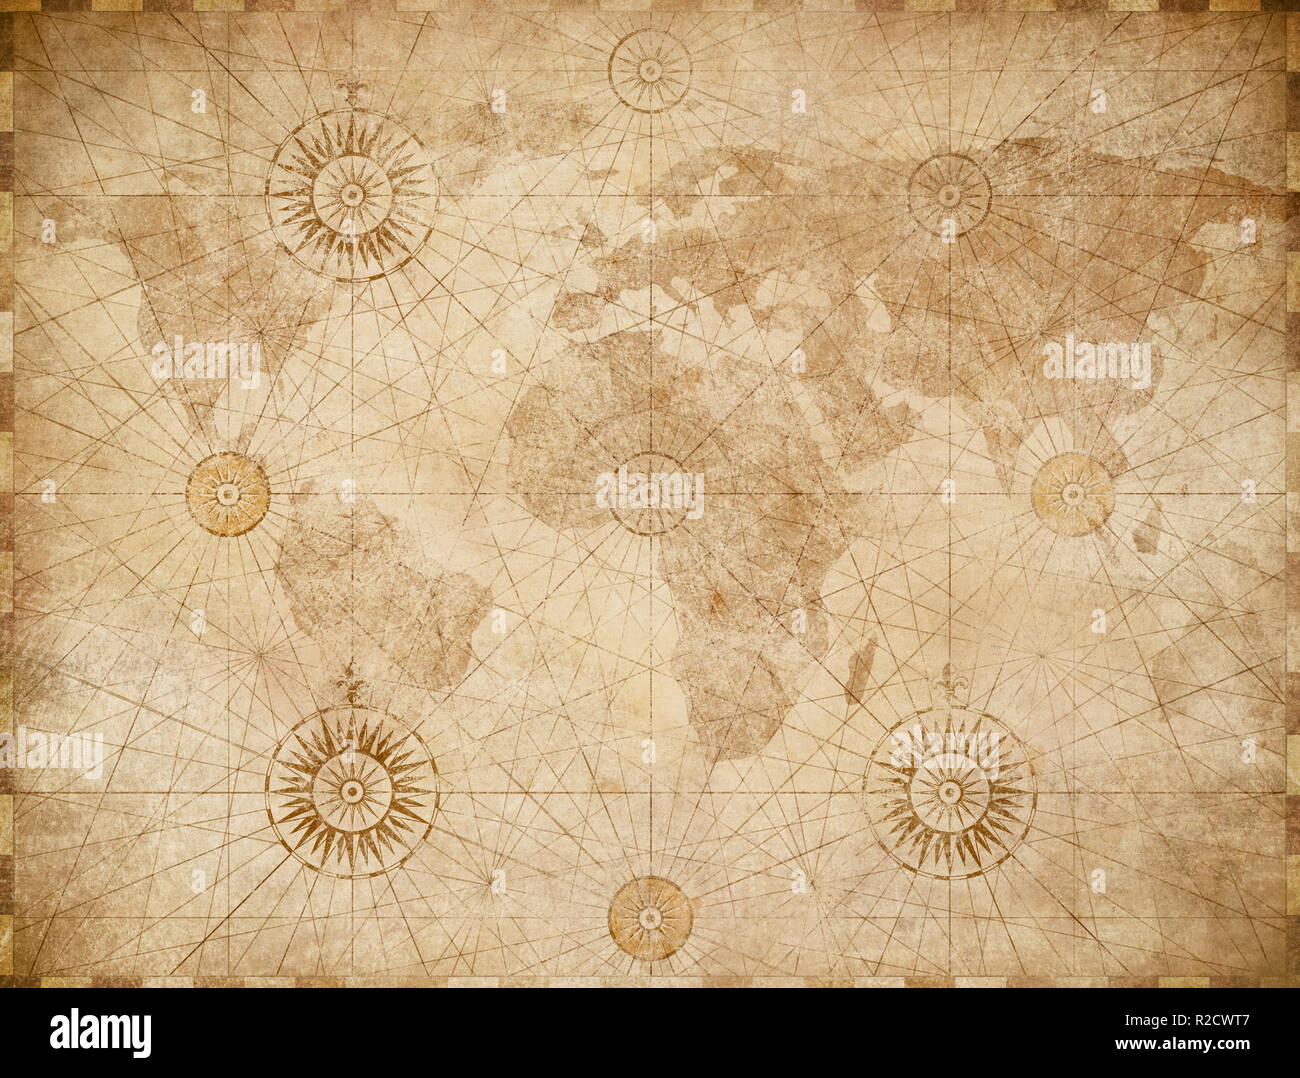 old medieval nautical world map Stock Photo